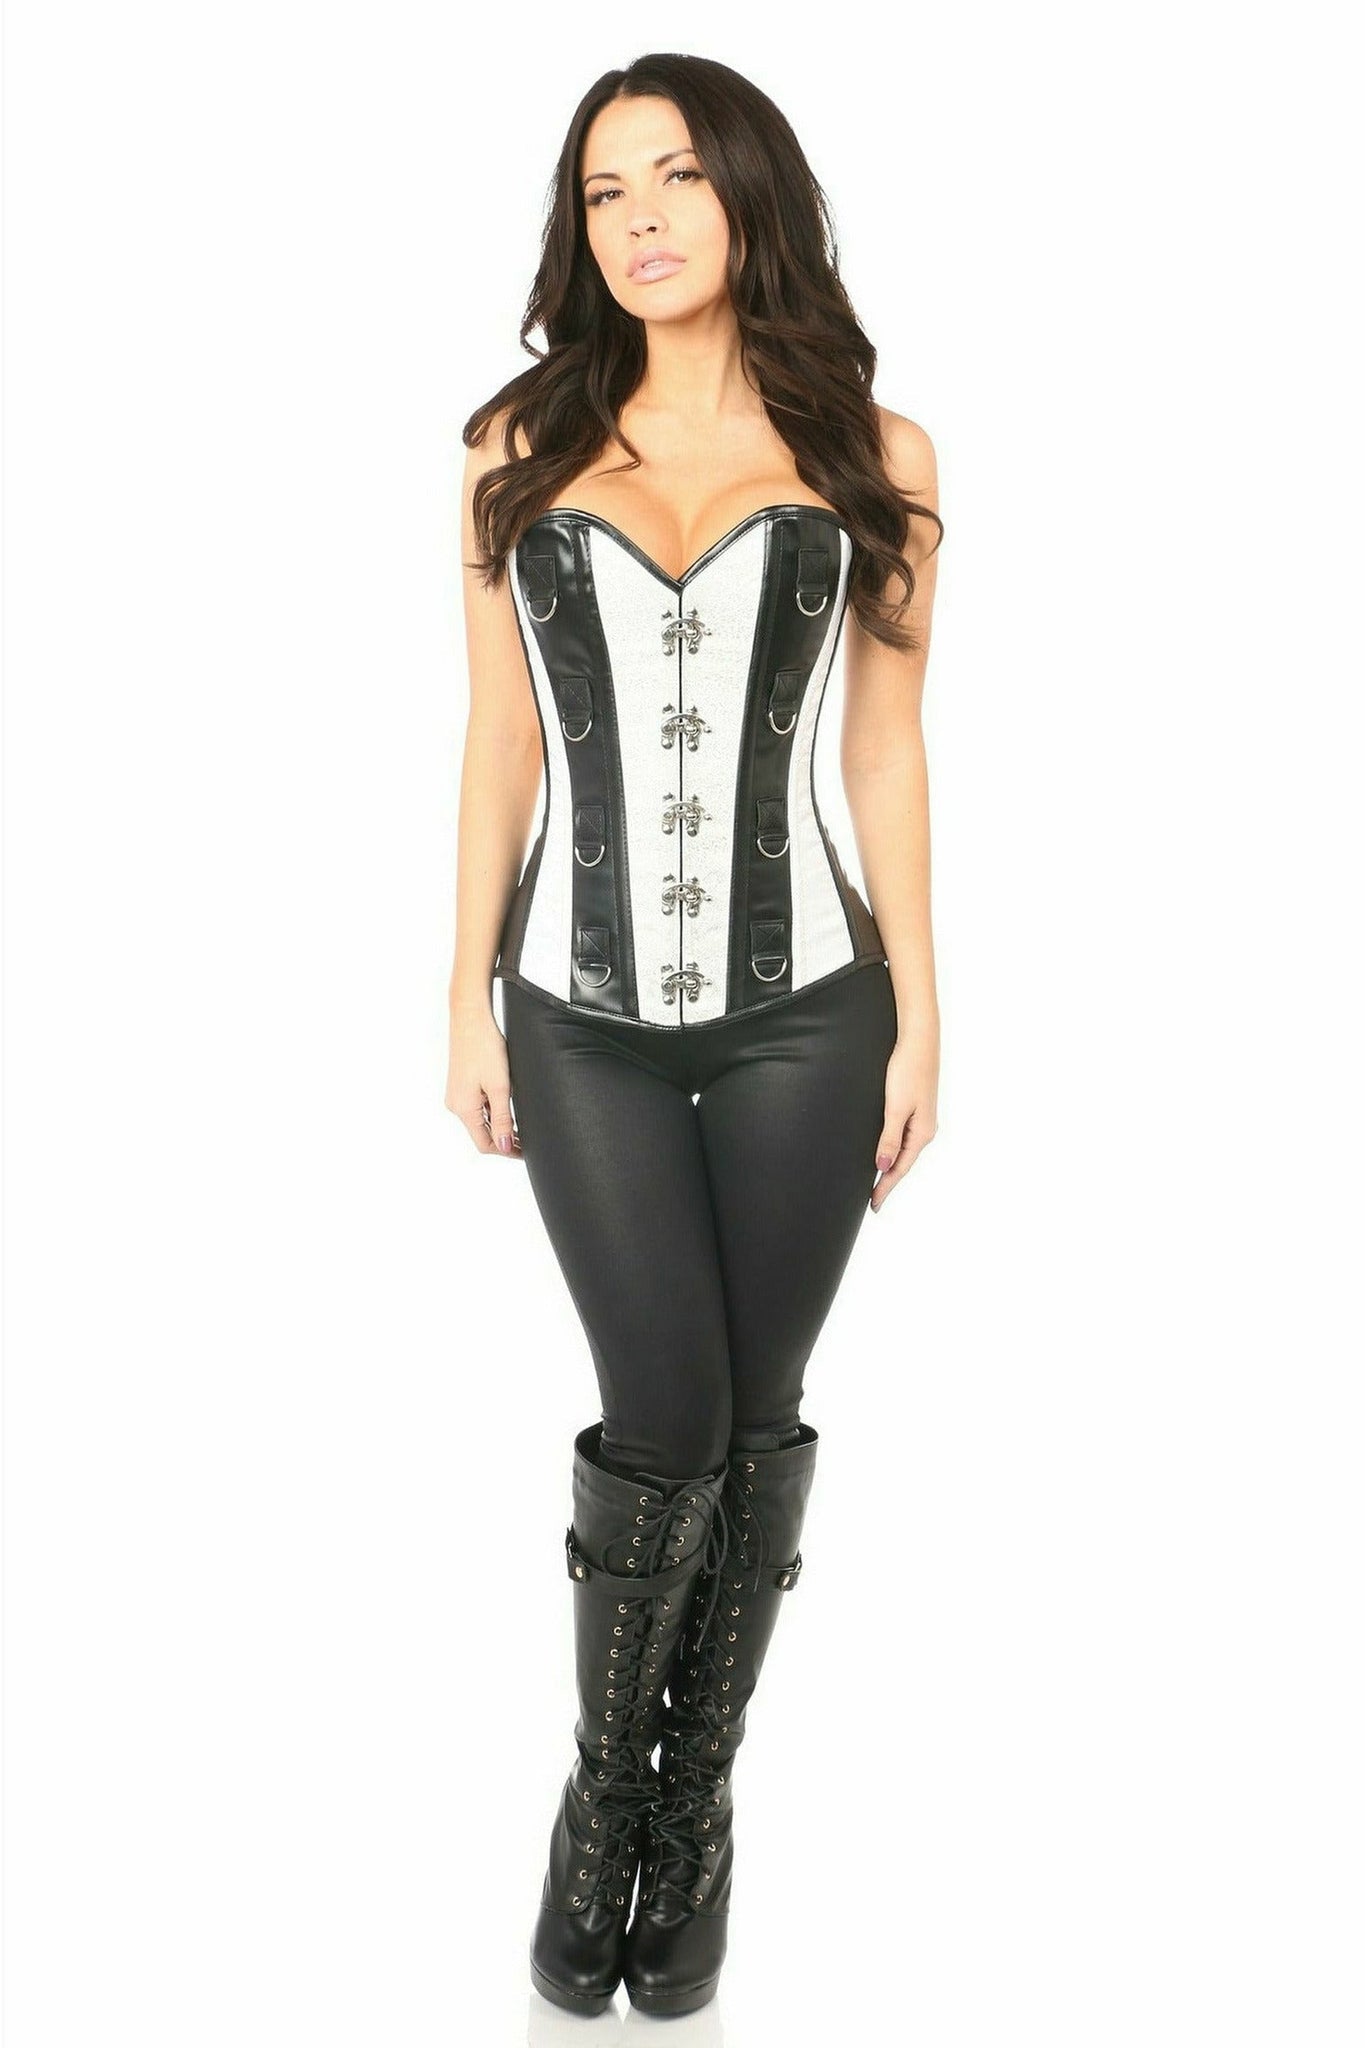 Top Drawer White Brocade and Faux Leather Steel Boned Corset by Daisy Corsets in Size S, M, L, XL, 2X, 3X, 4X, 5X, or 6X